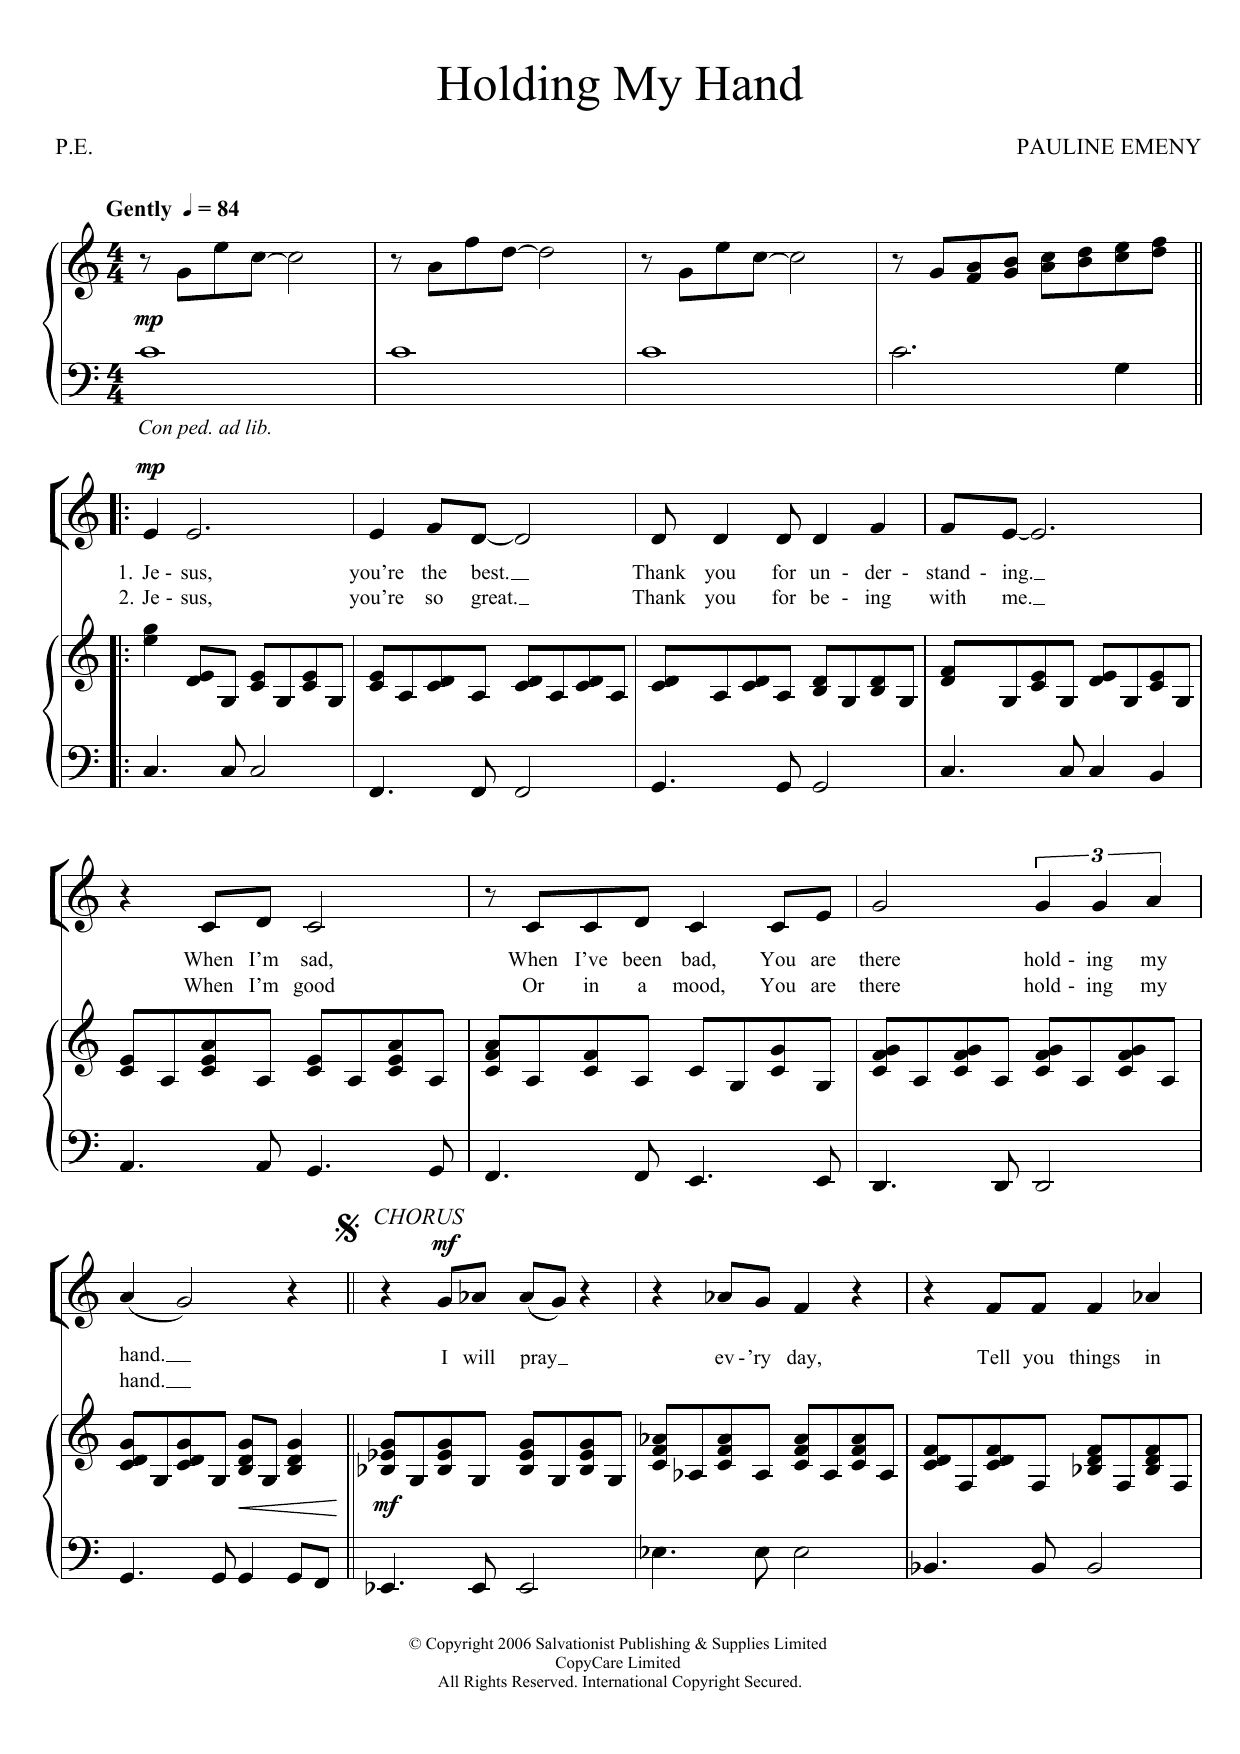 Download The Salvation Army Holding My Hand Sheet Music